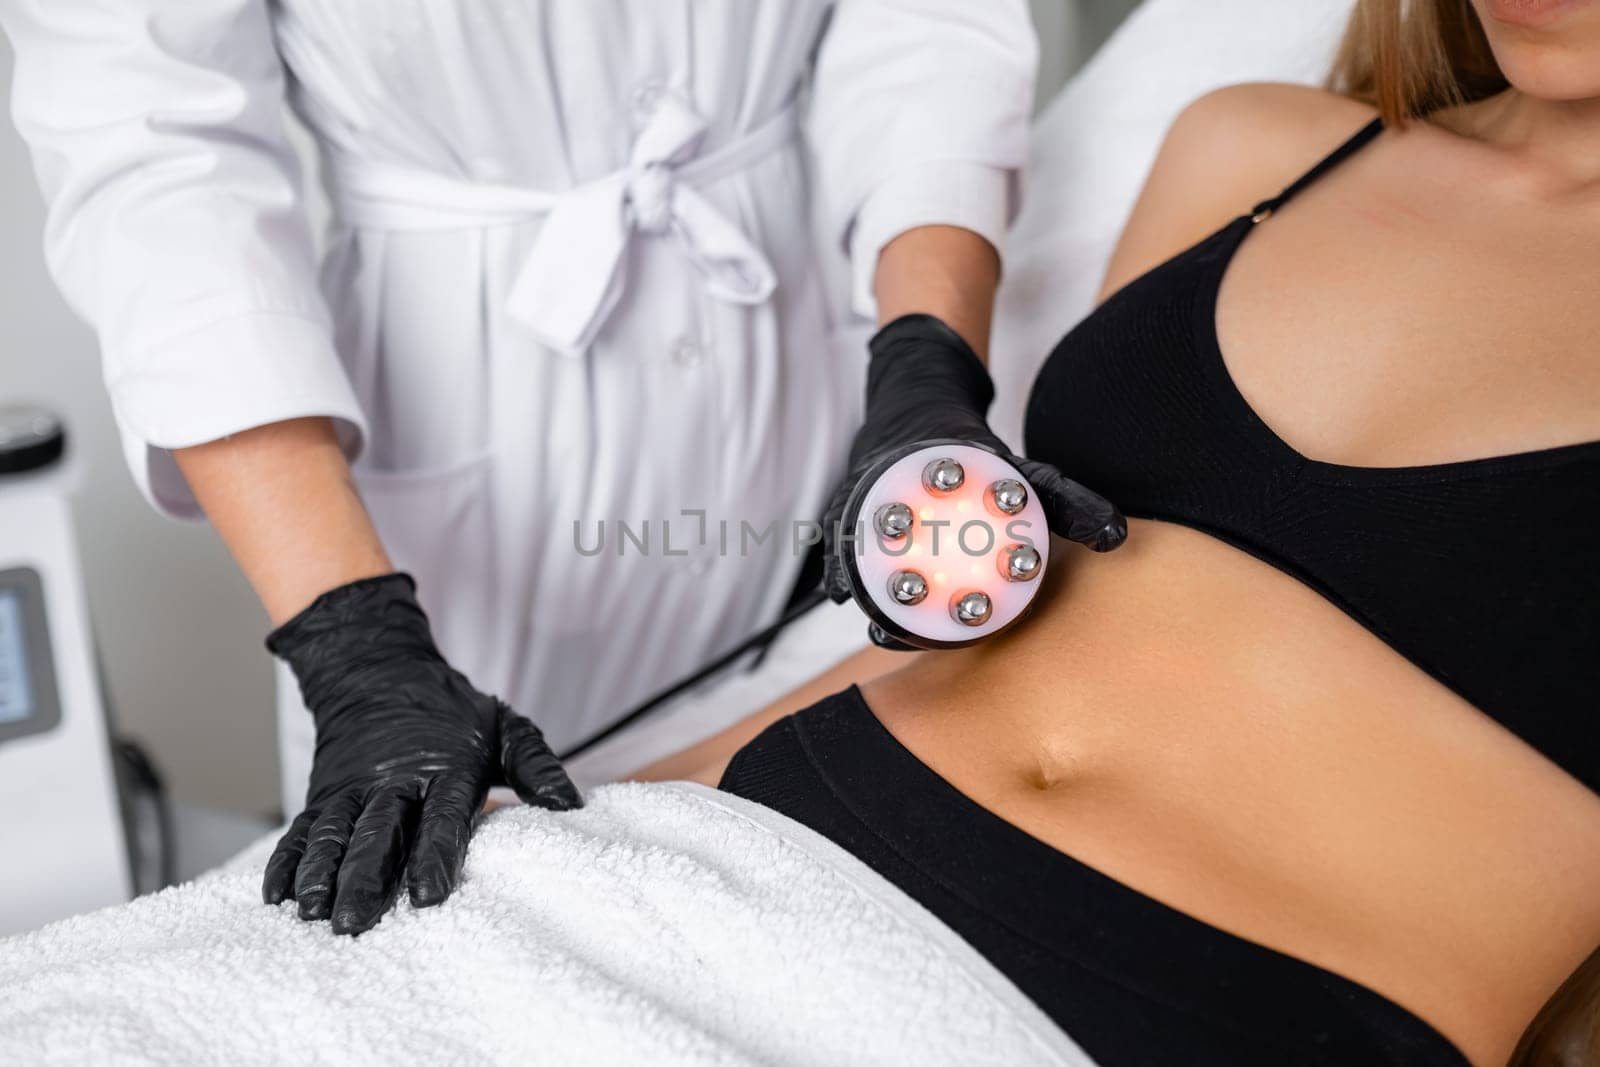 Belly fat reduction is the focus as a young woman undergoes RF body cavitation lifting. by vladimka